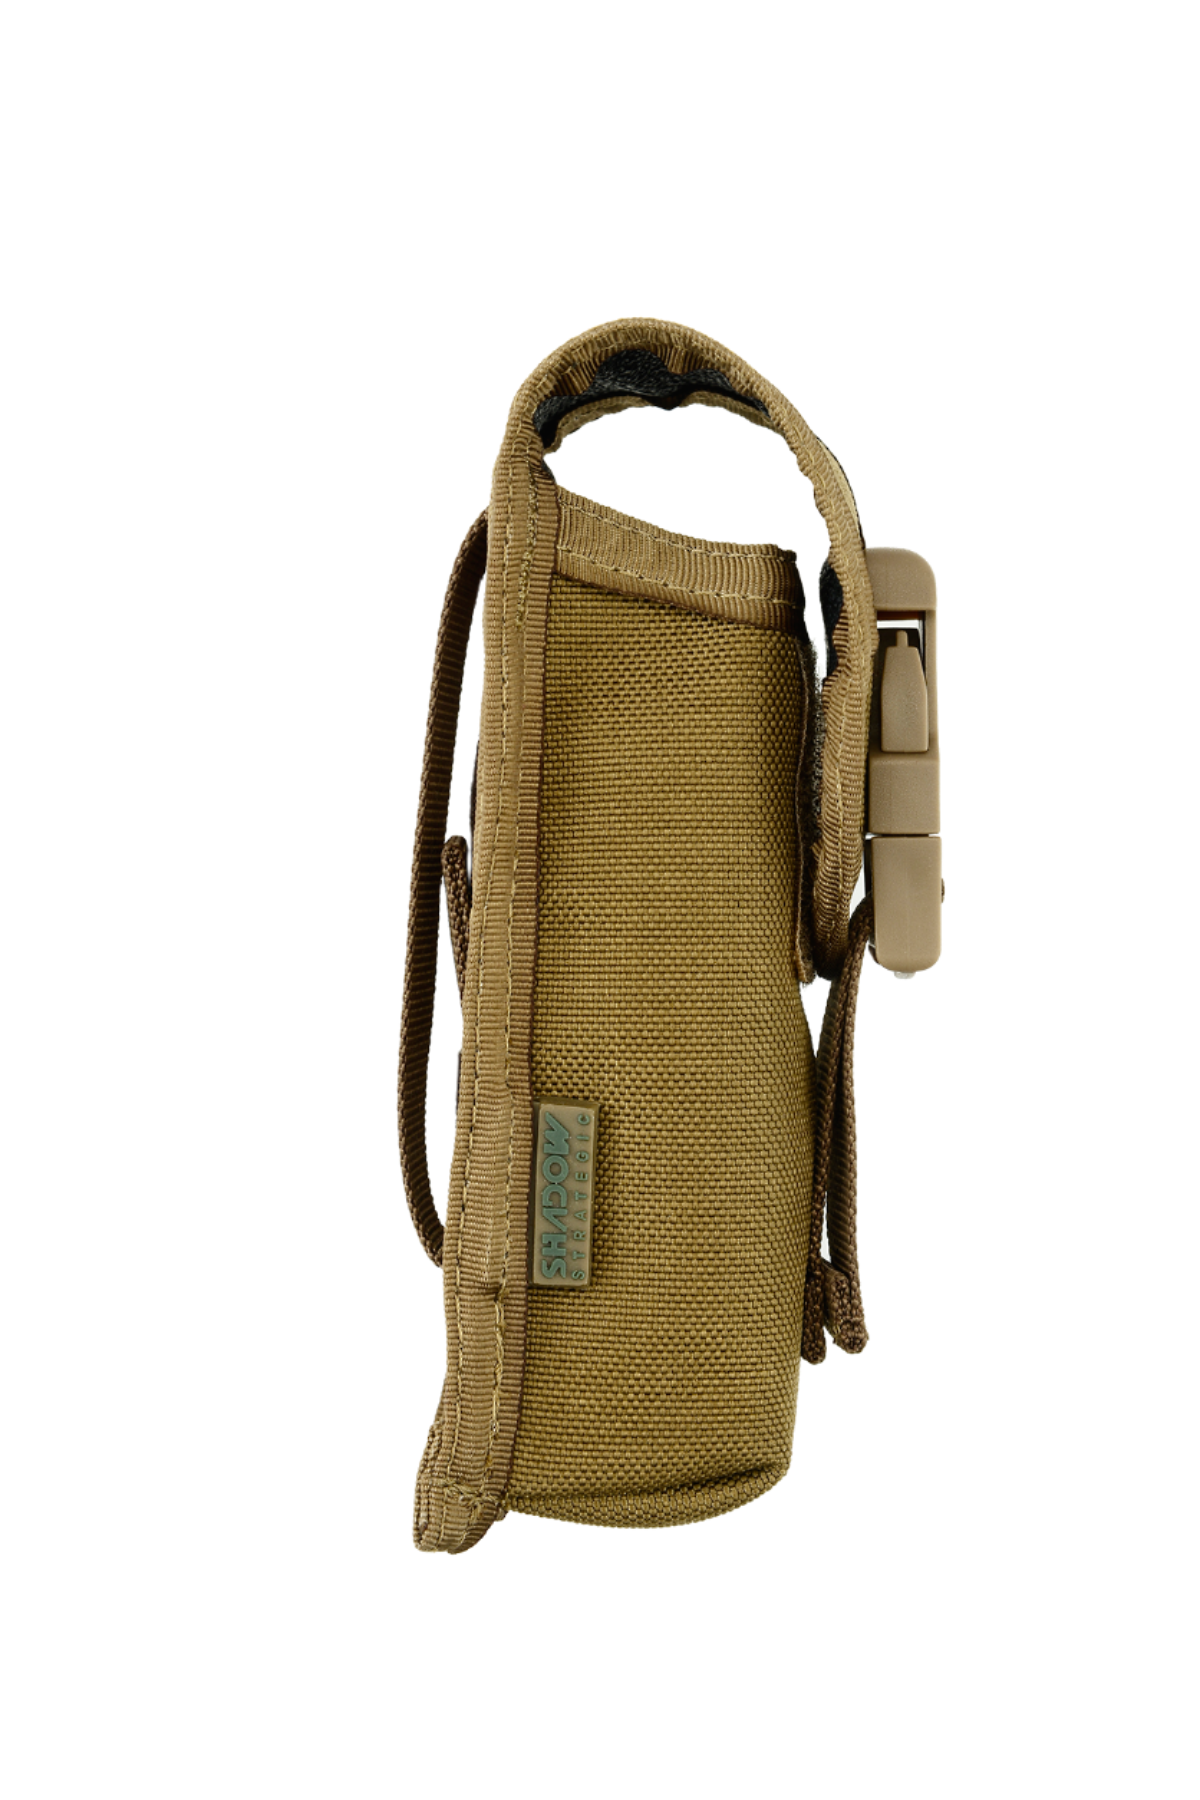 SHE-1037 FLASHLIGHT POUCH-COYOTE SIDE